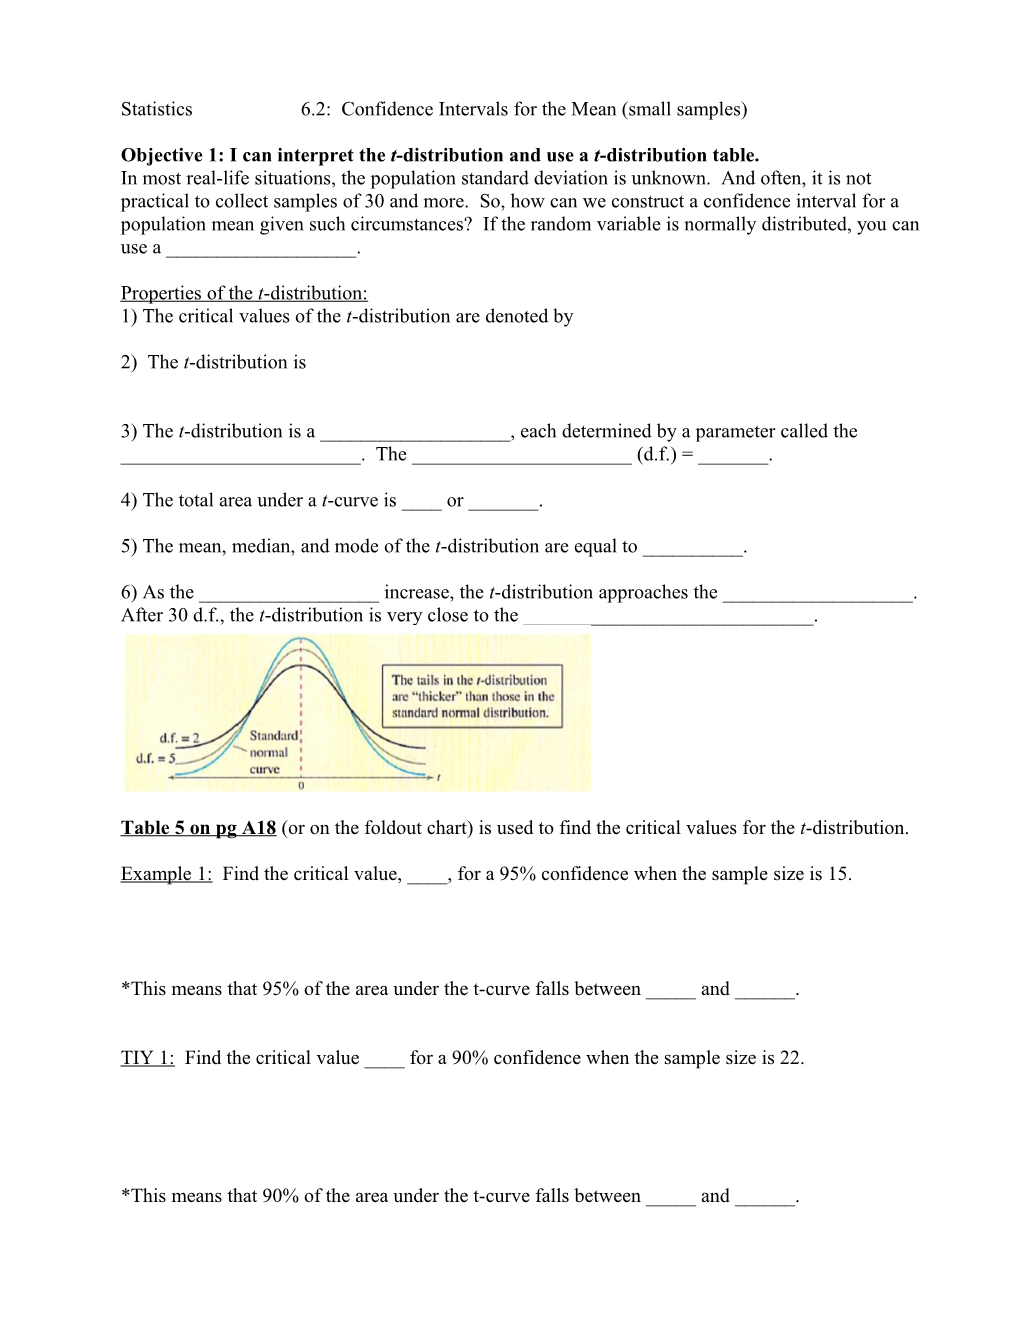 Objective 1: I Can Interpret the T-Distribution and Use a T-Distribution Table